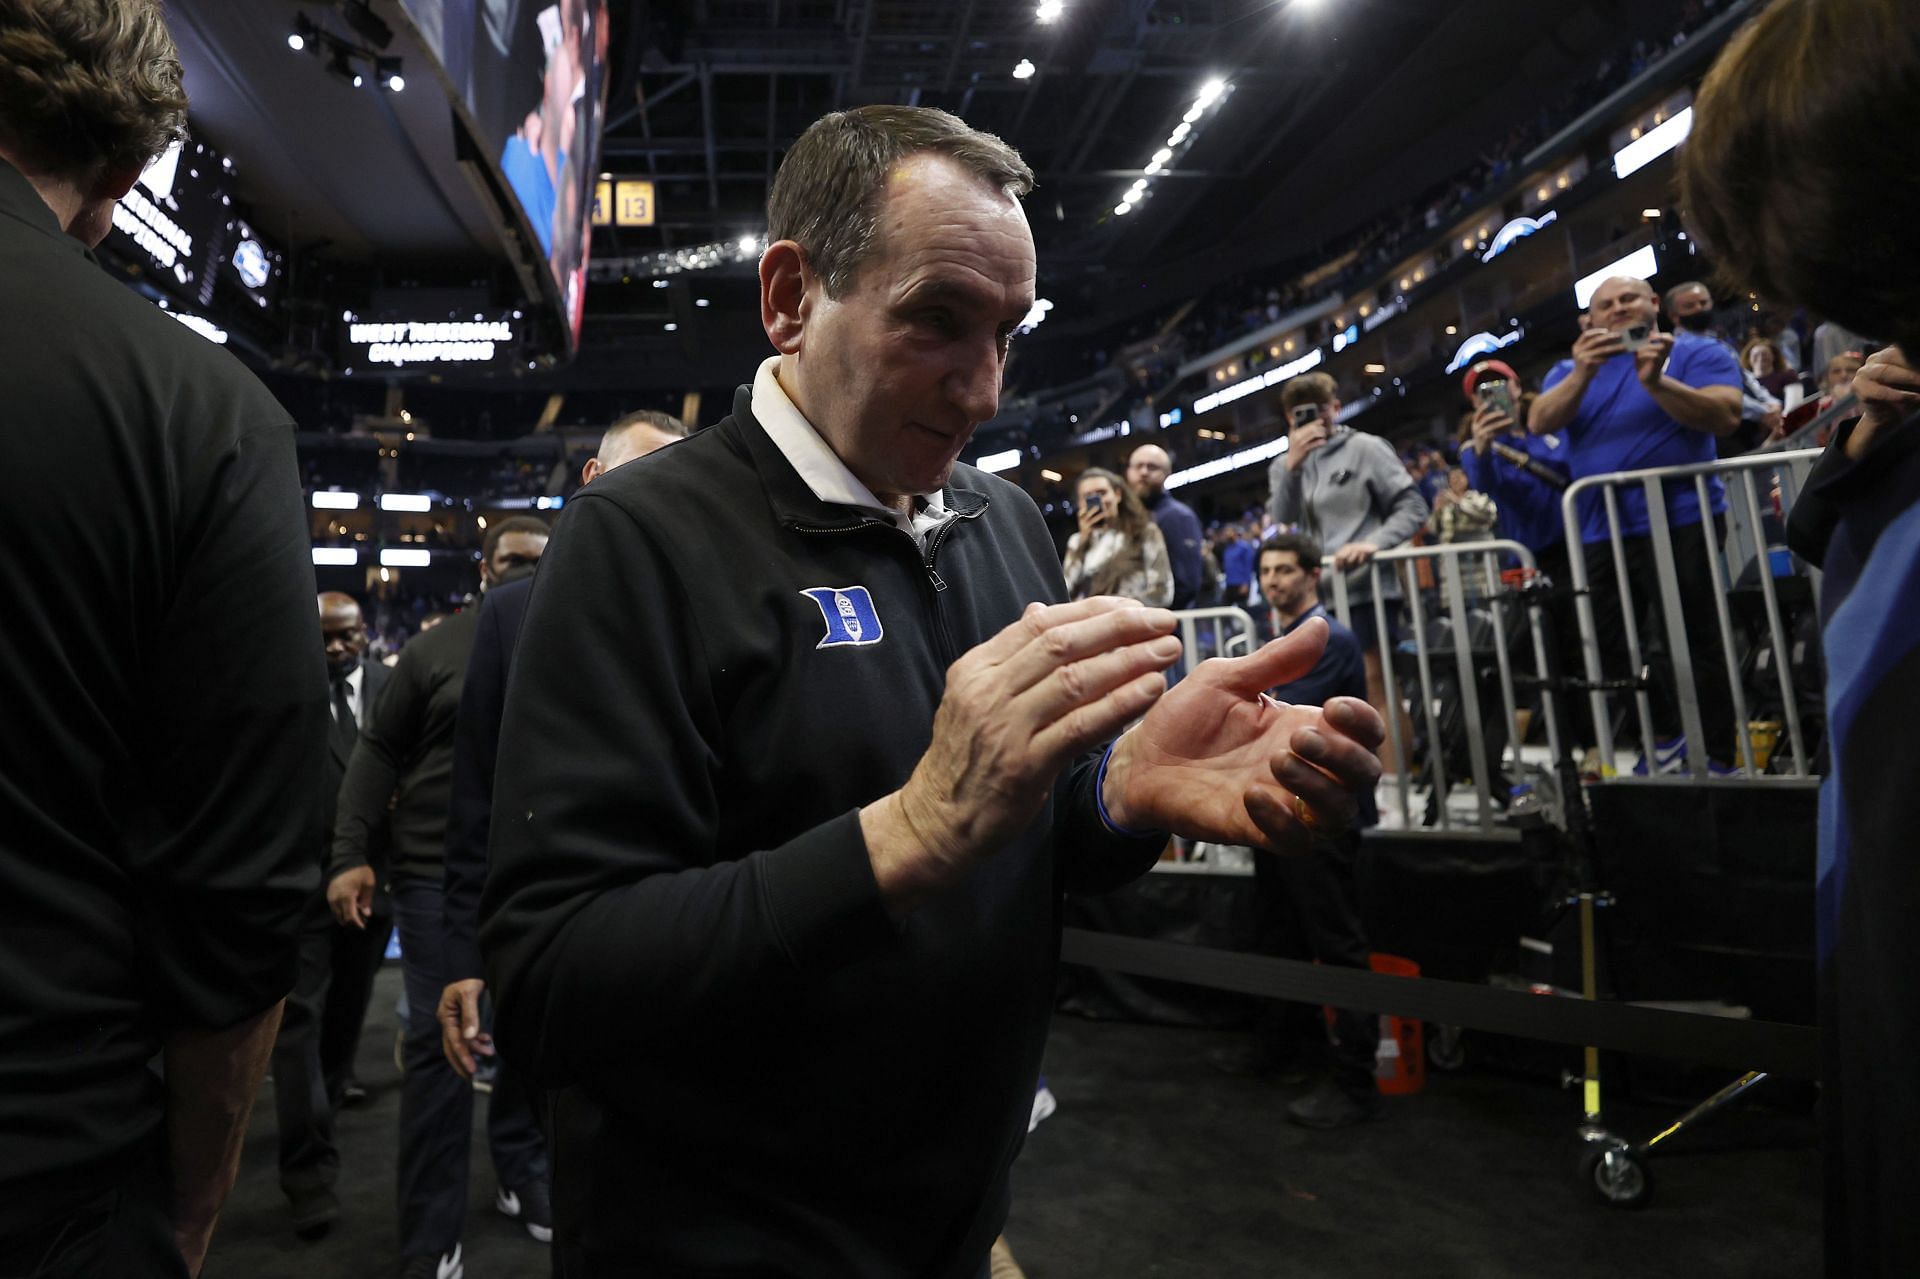 Mike Krzyzewski thinks it is cool that the two rival schools get to face one another.